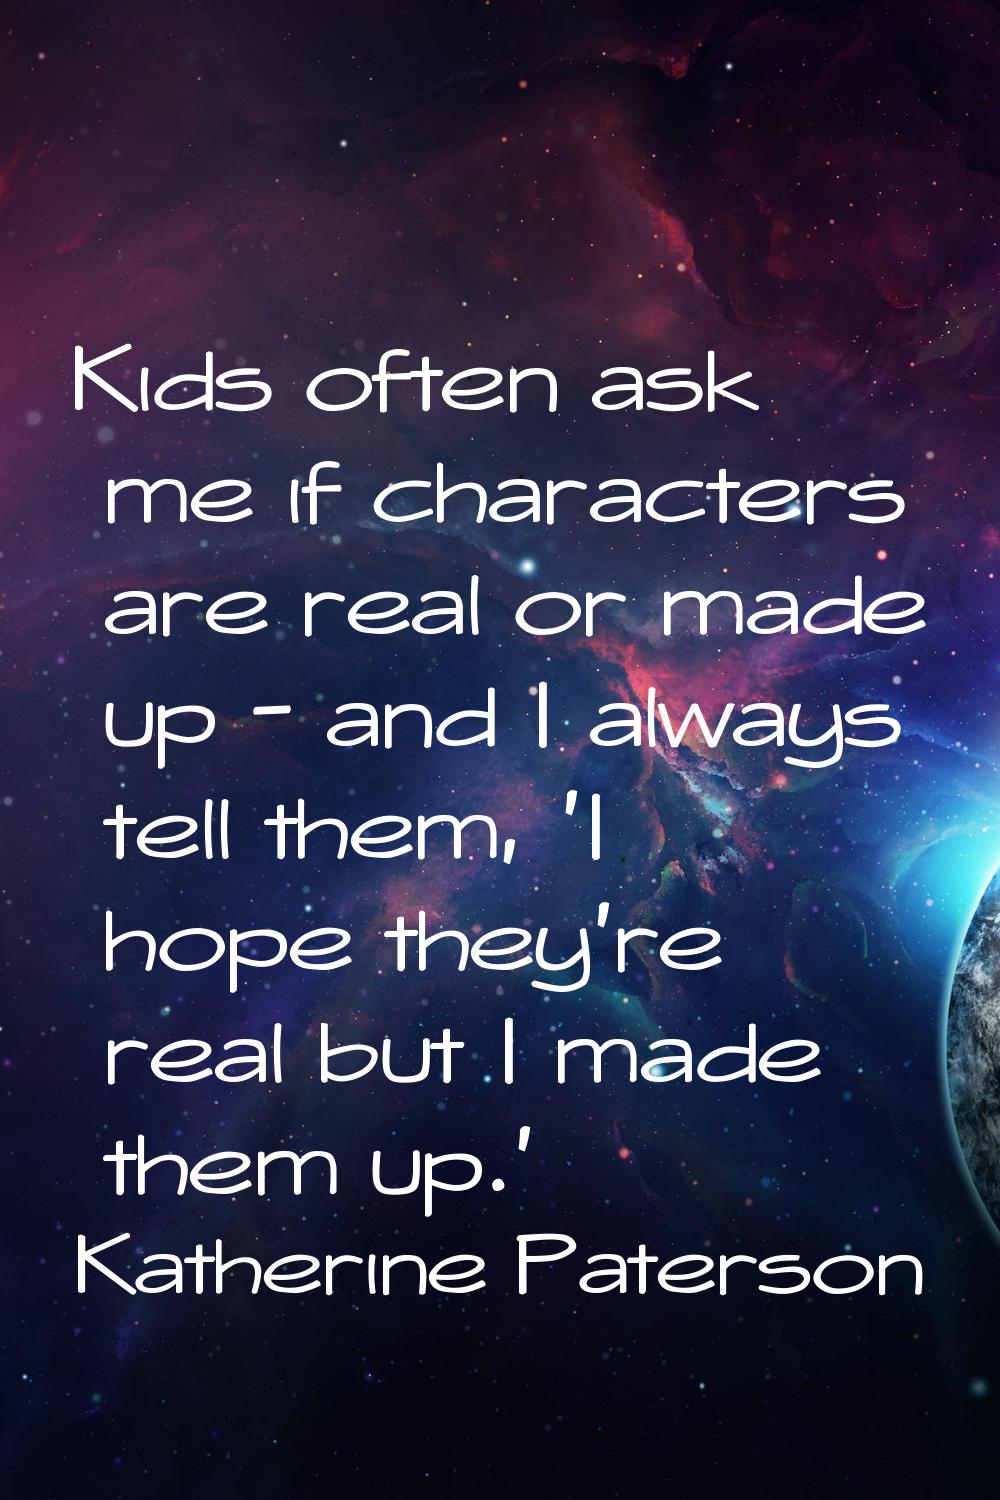 Kids often ask me if characters are real or made up - and I always tell them, 'I hope they're real 